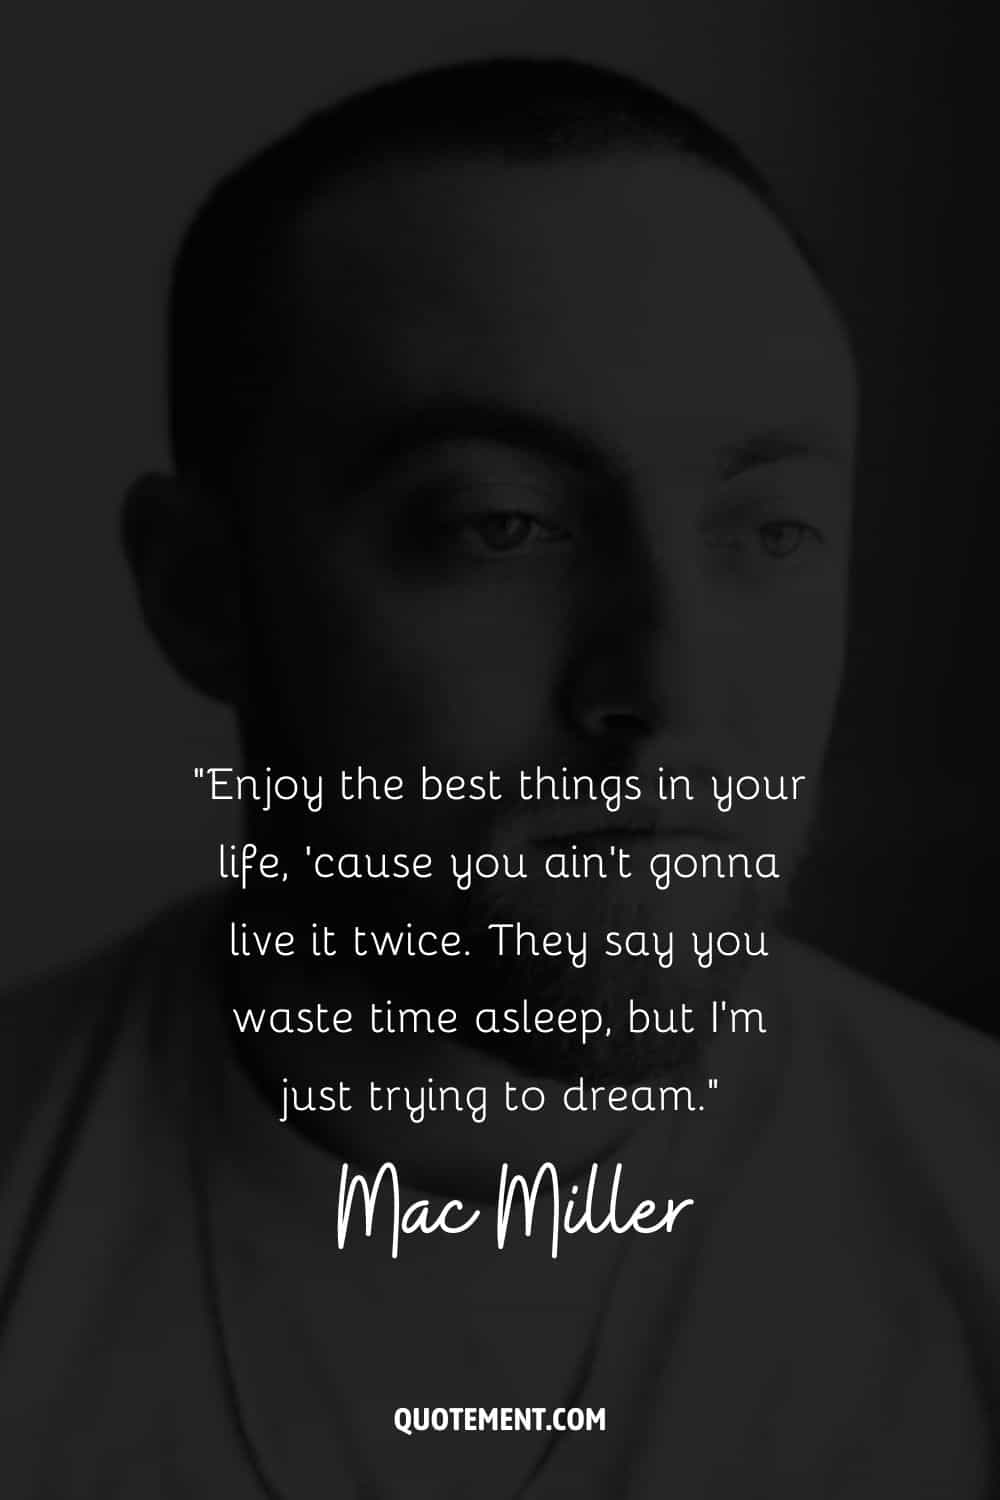 “Enjoy the best things in your life, ’cause you ain’t gonna live it twice. They say you waste time asleep, but I’m just trying to dream.” – Mac Miller